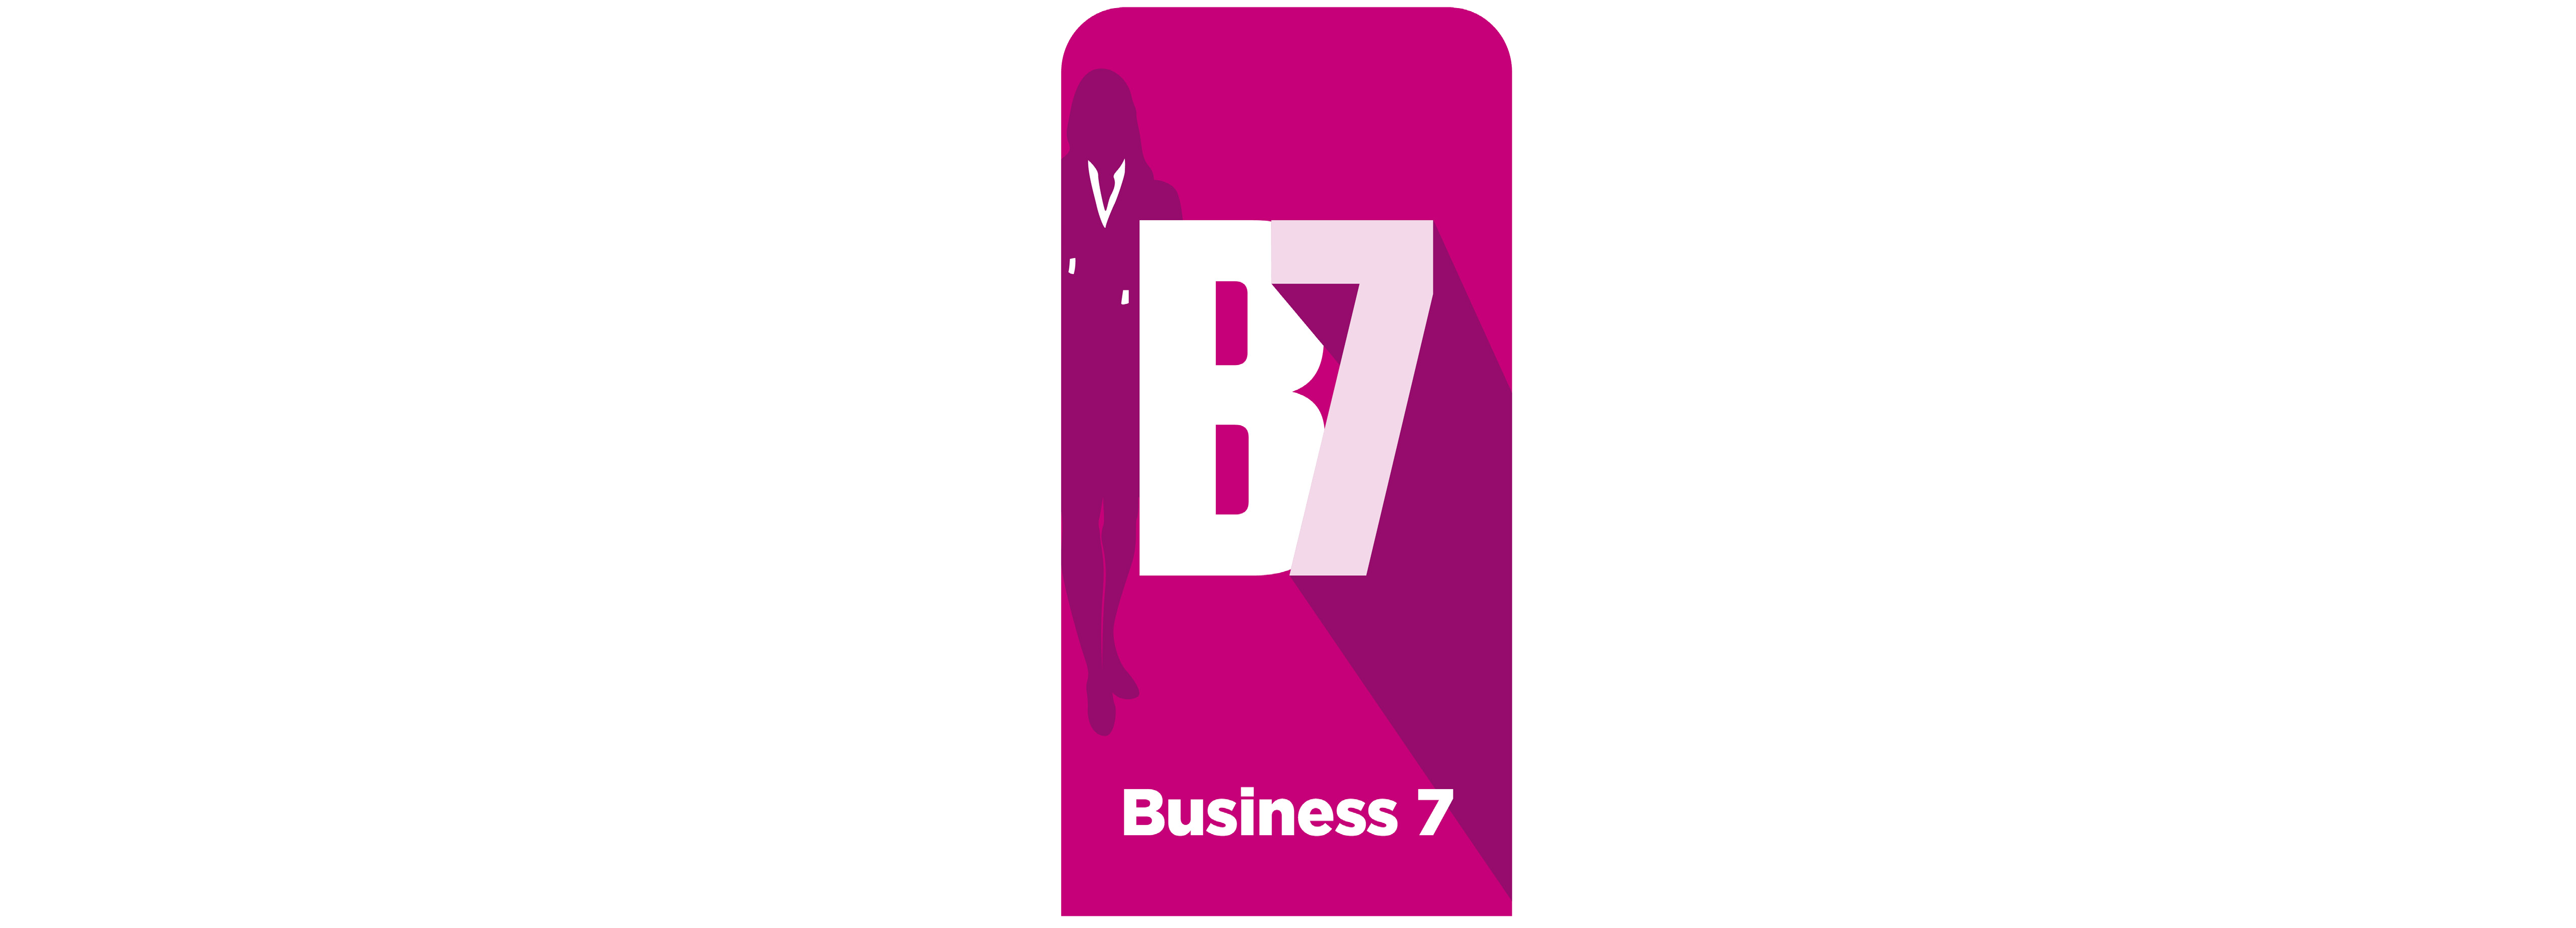 Business 7 - 25 August 2021